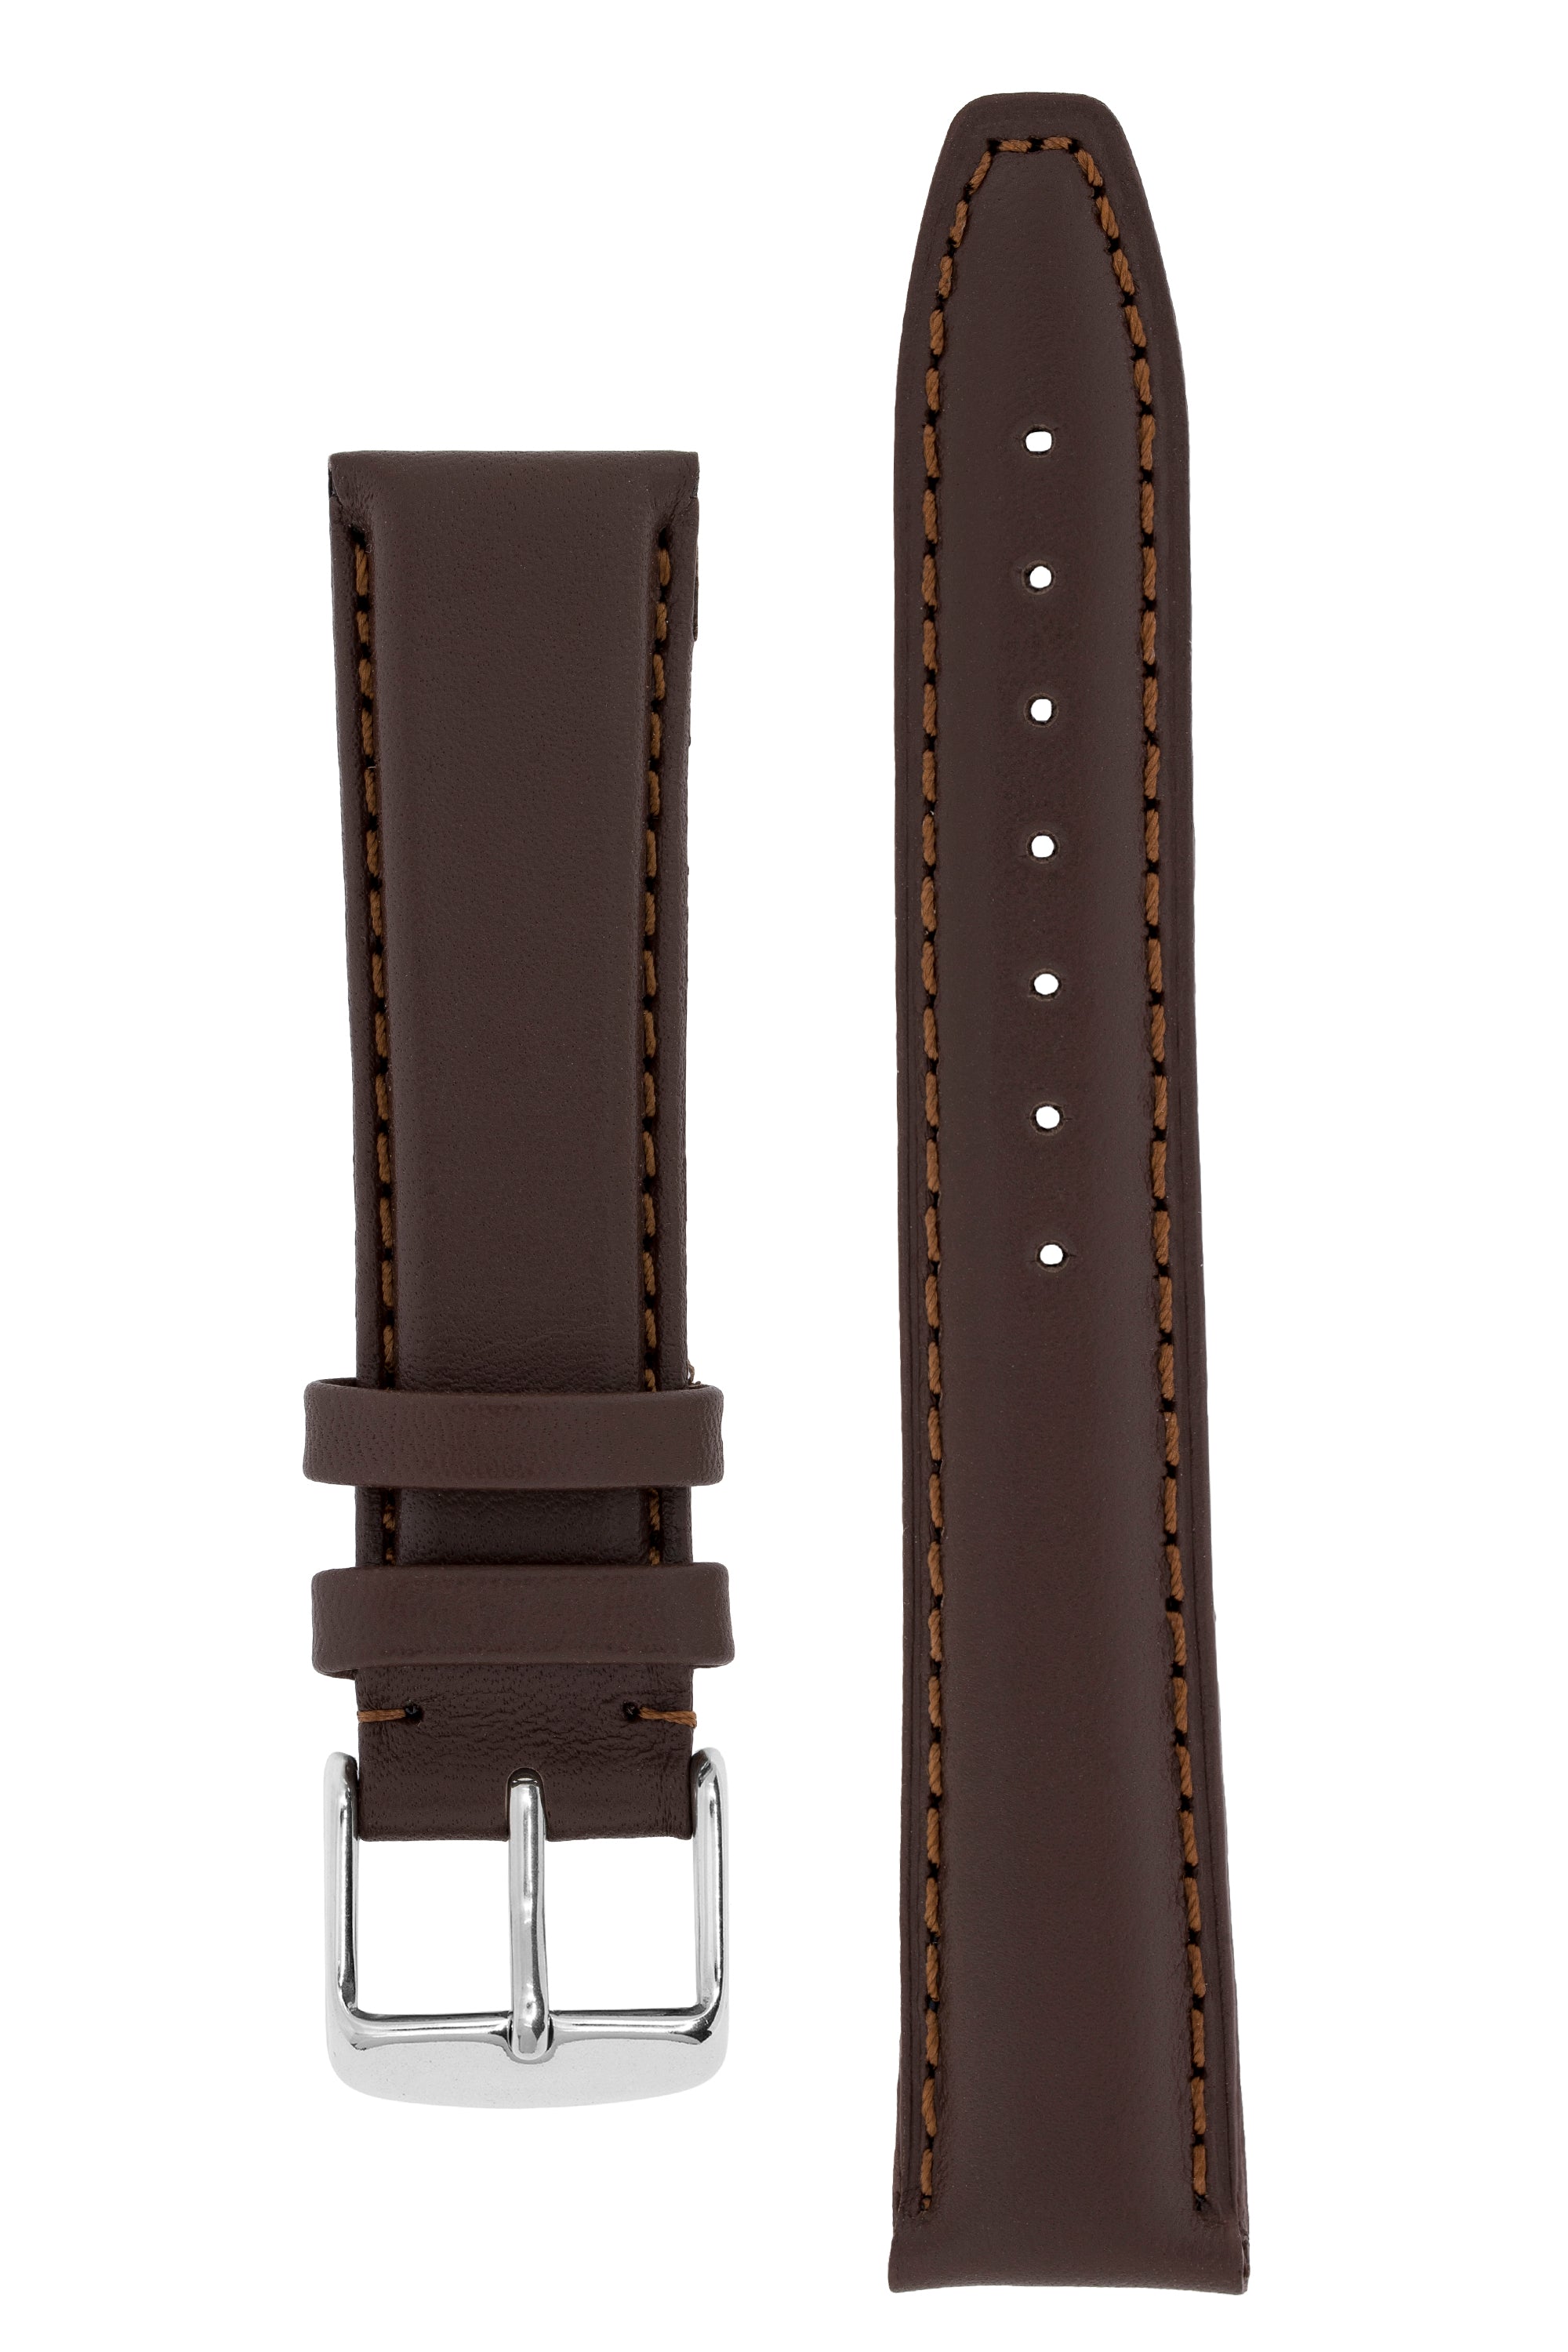 IWC-Style Calf Leather Watch Strap in DARK BROWN | WatchObsession